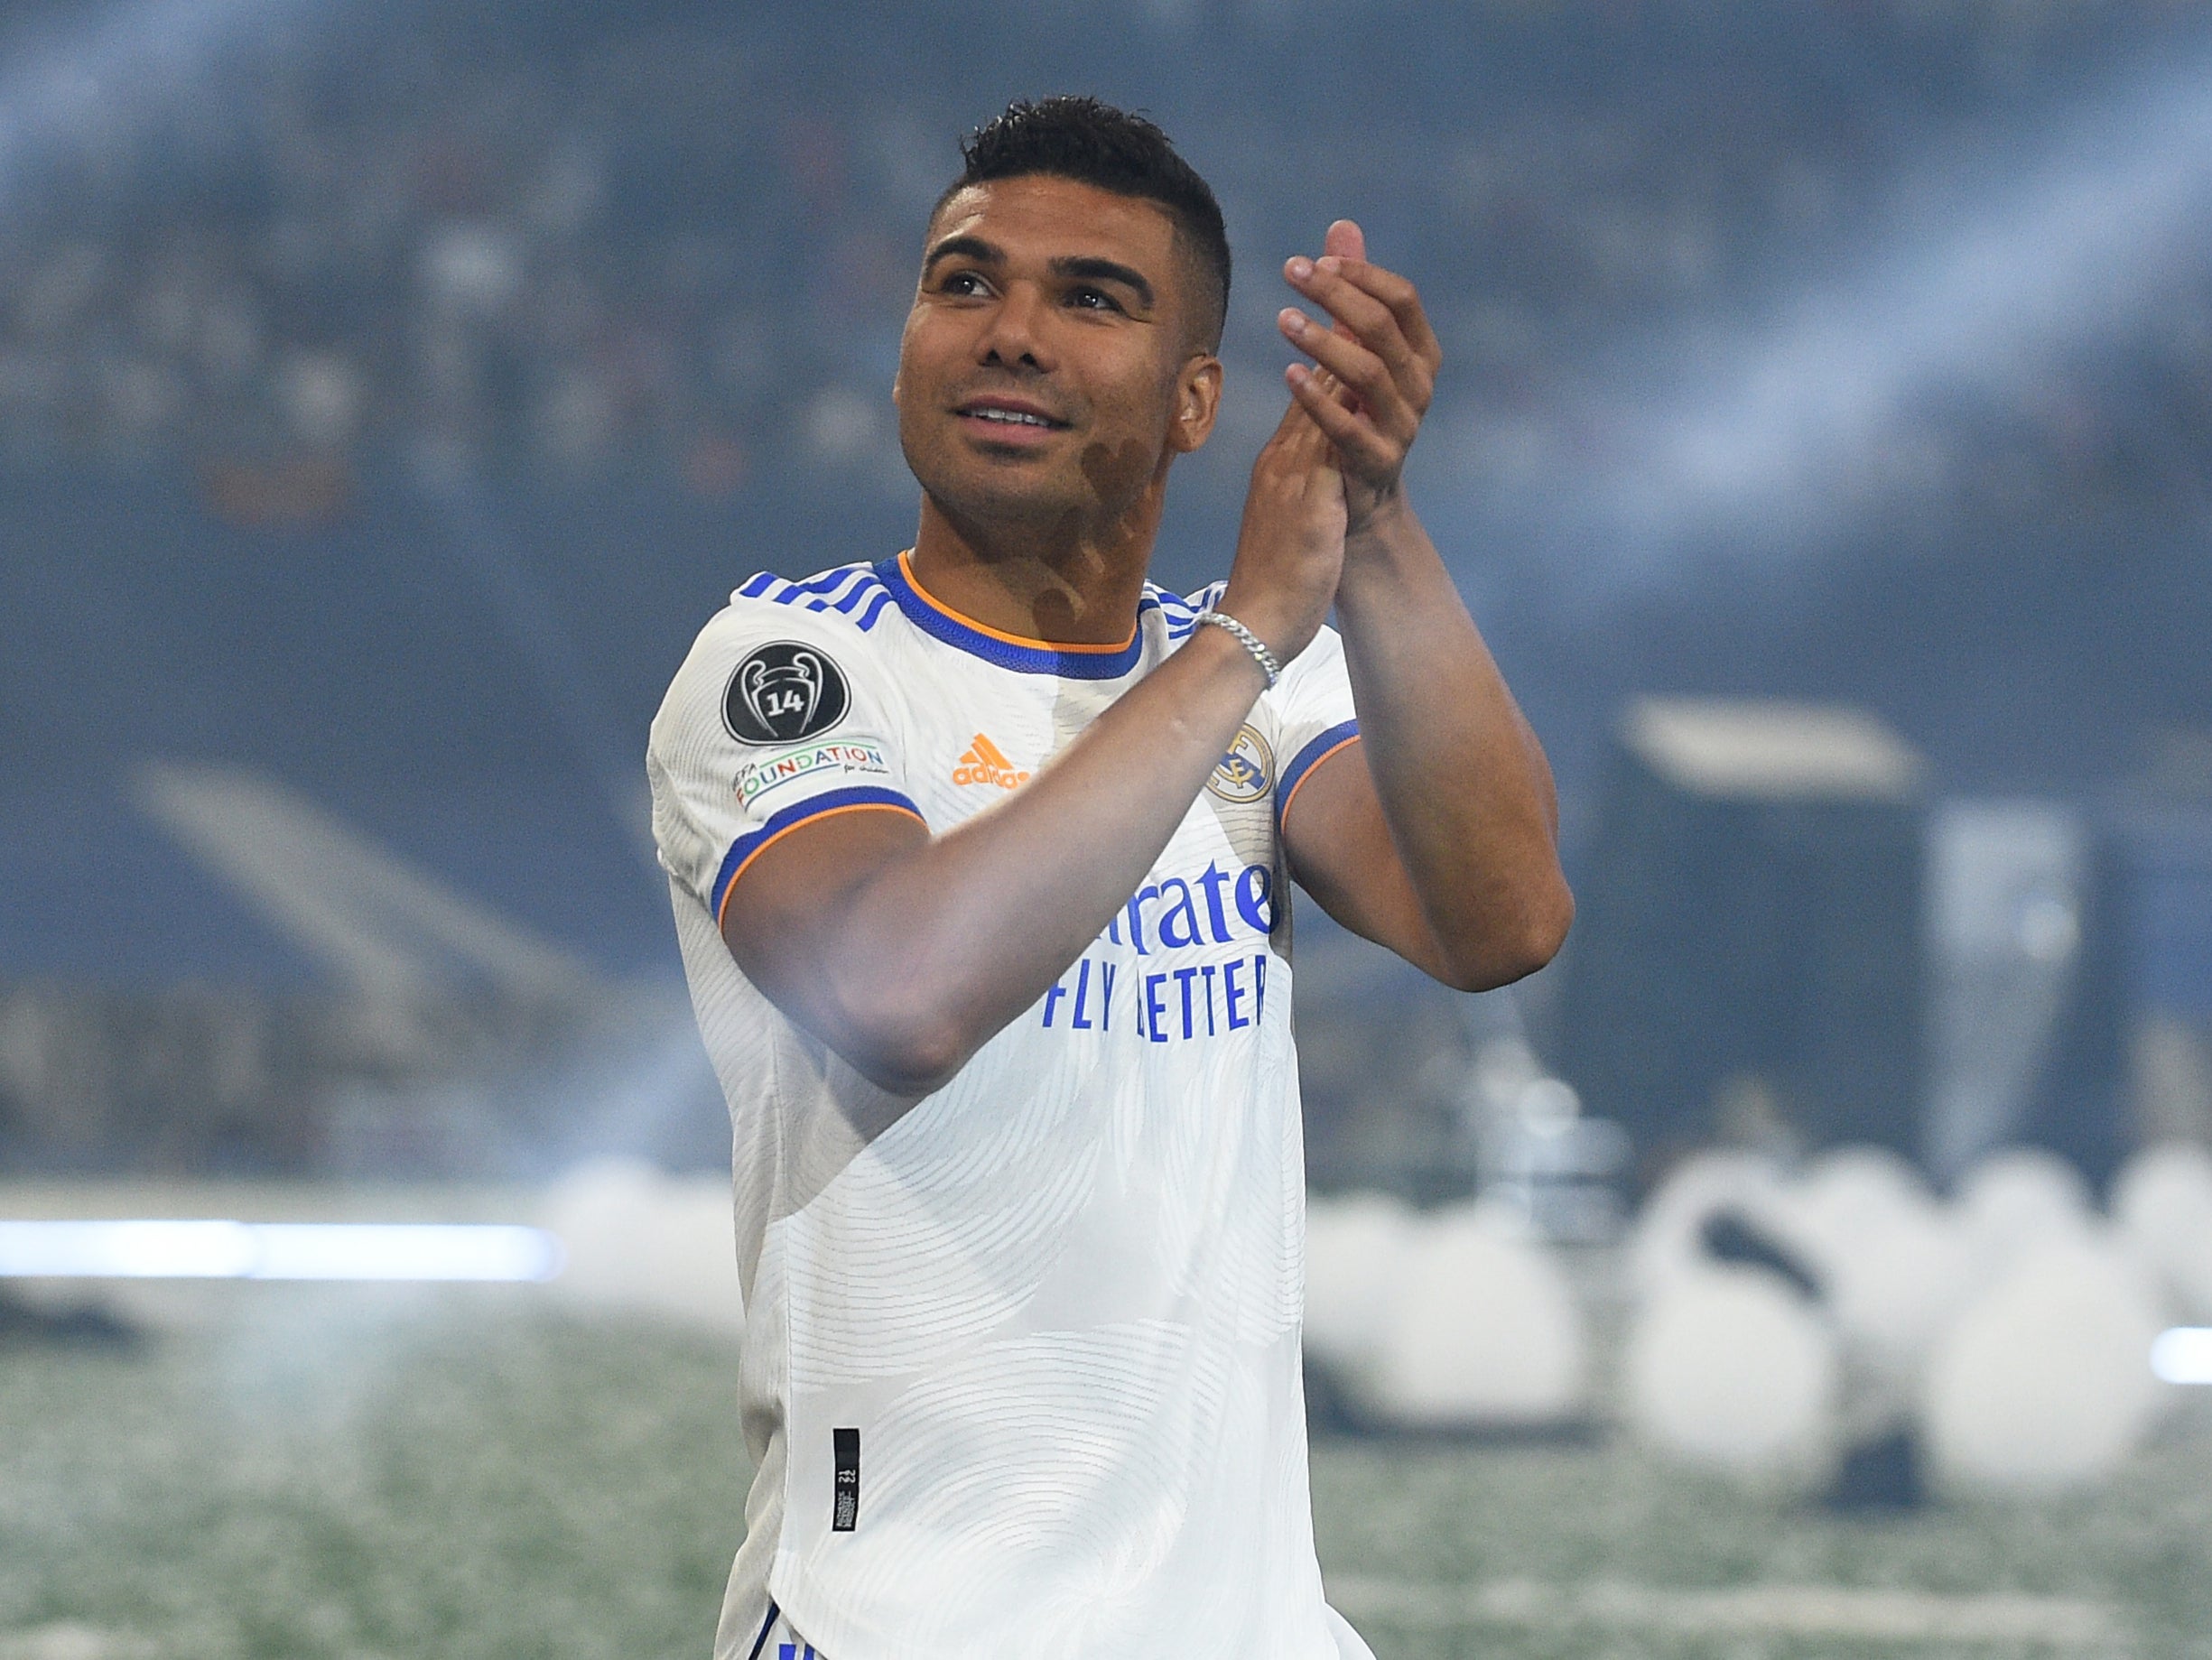 Real Madrid midfielder Casemiro has emerged as a target for Manchester United